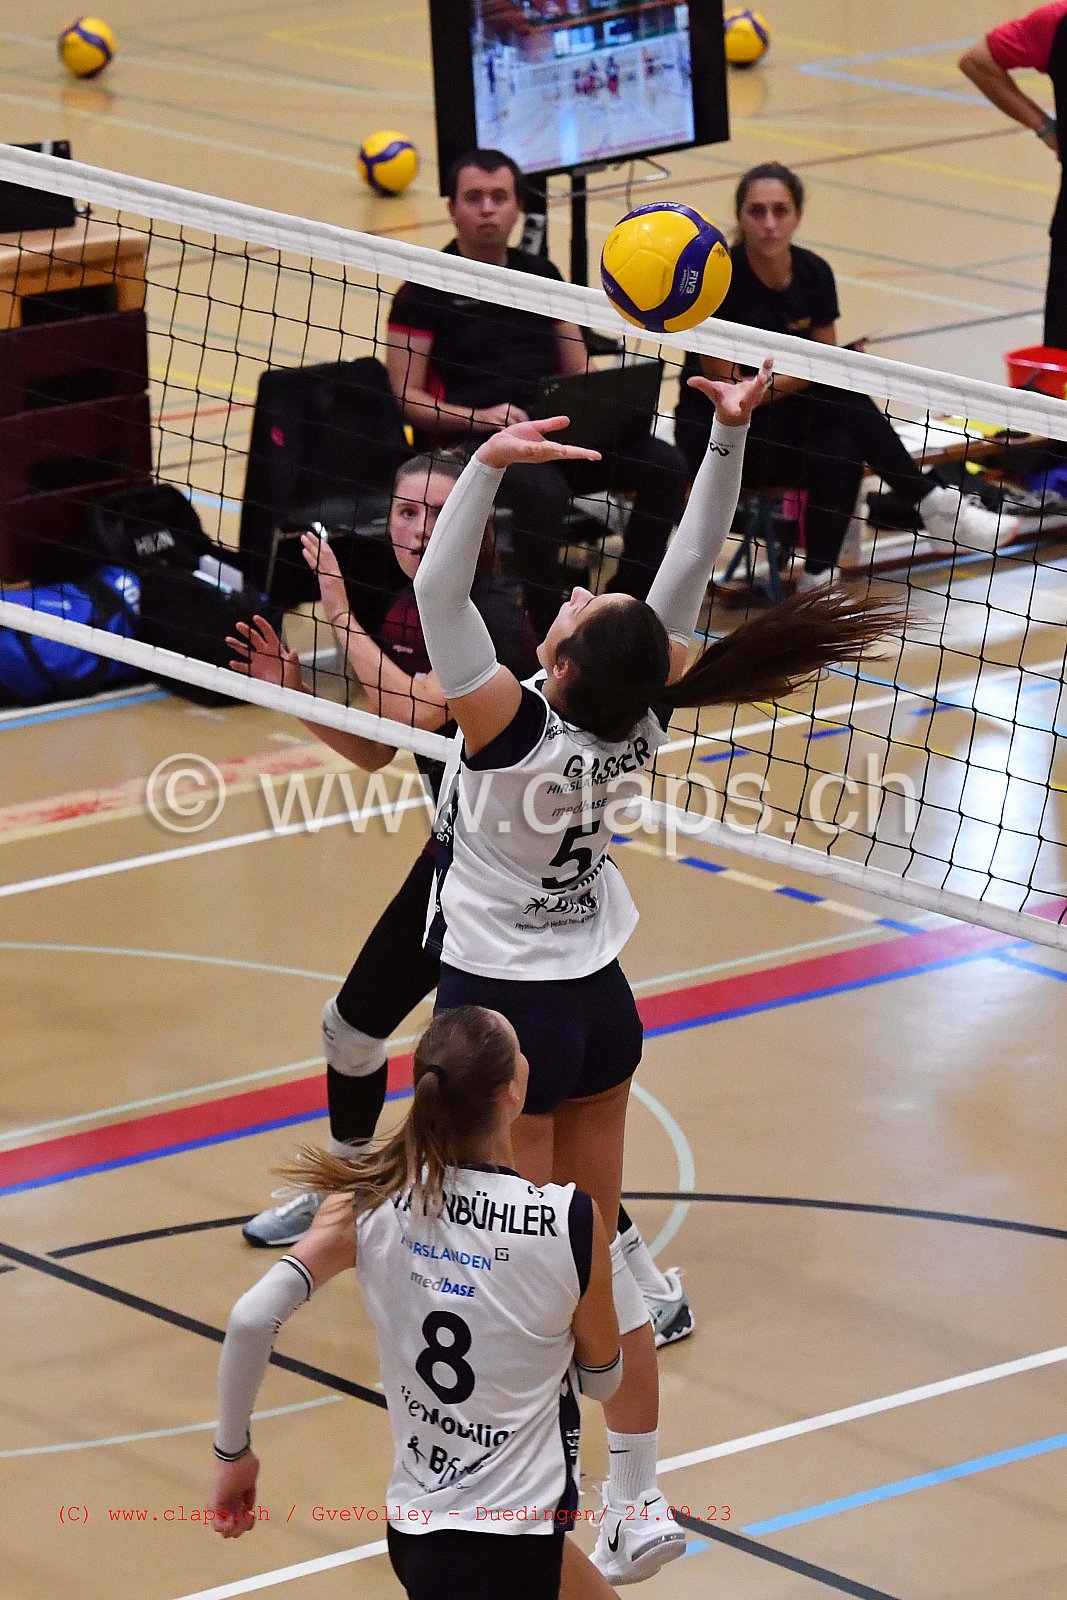 20230924 GveVolley - Duedingen Amical